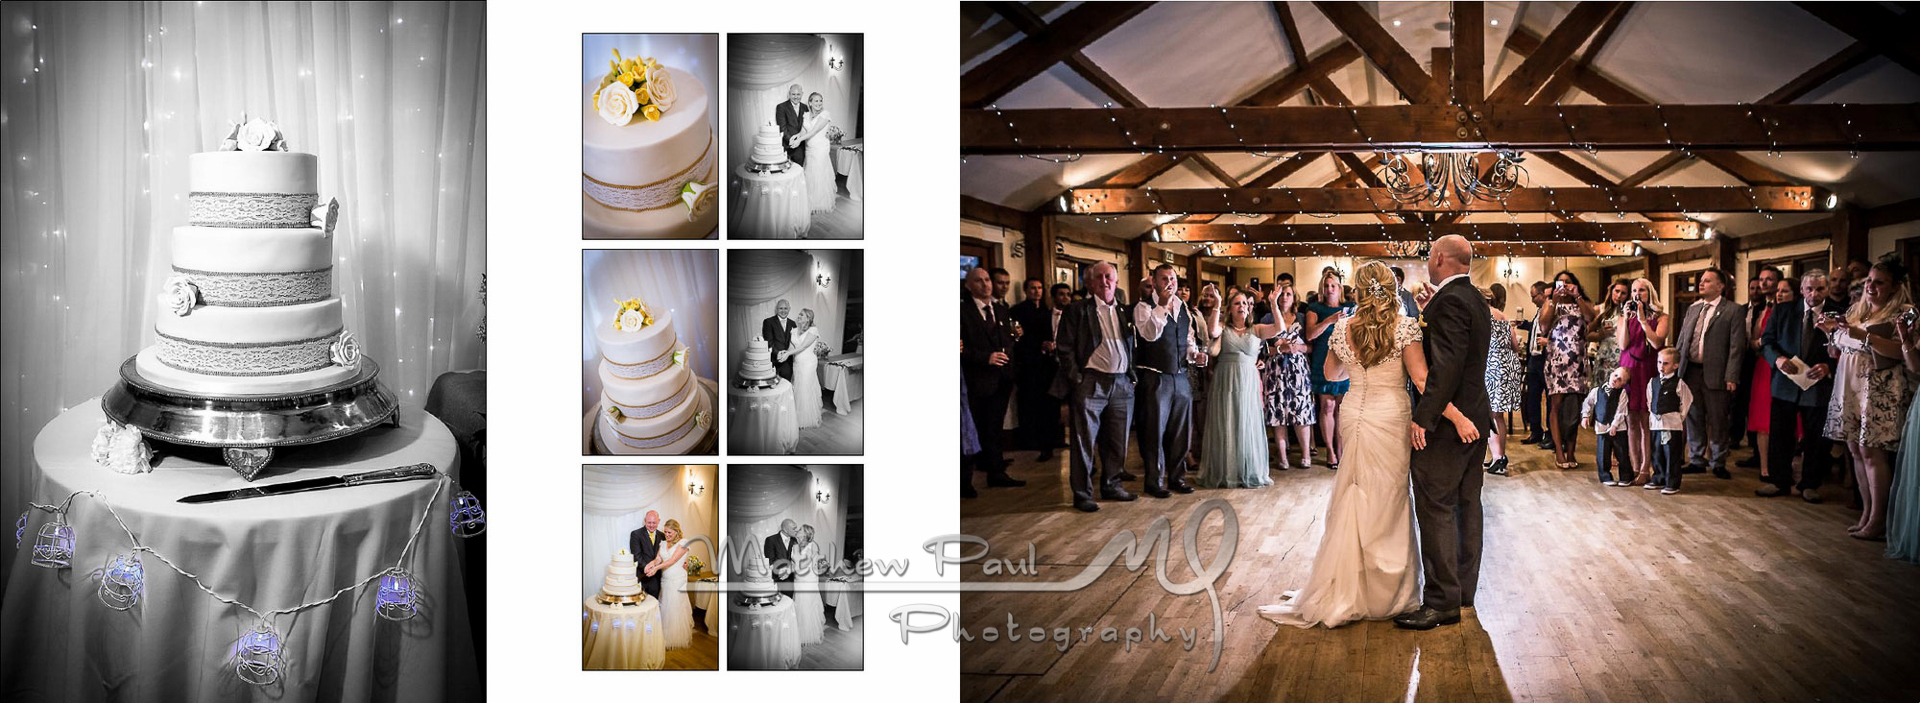 Coltsford Mill, First dance at wedding